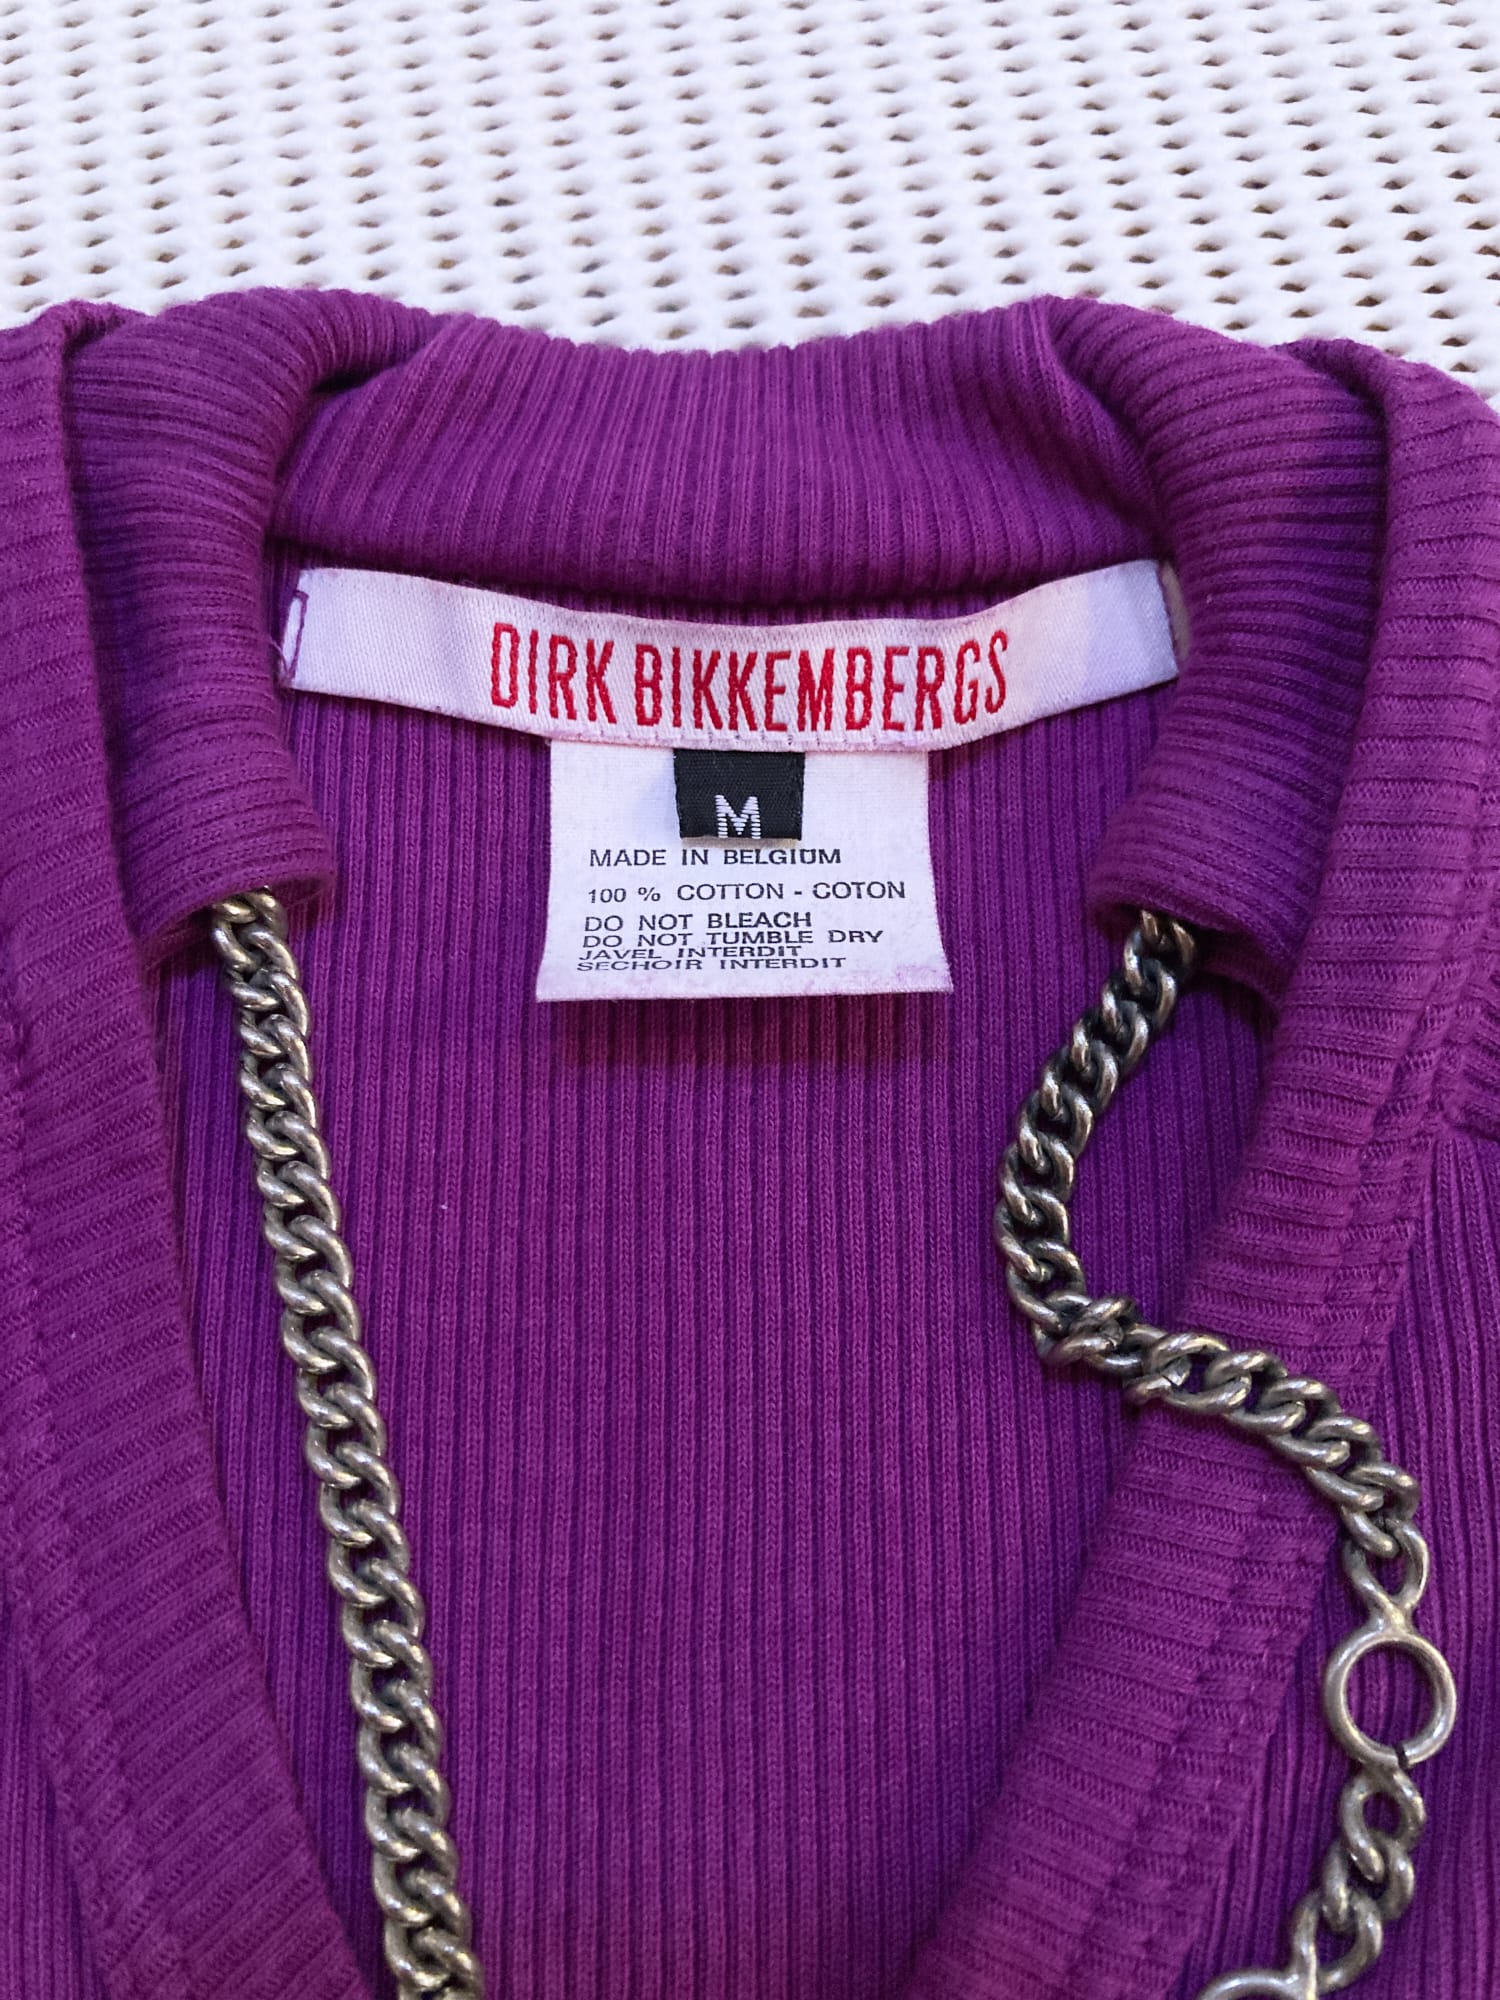 Dirk Bikkembergs winter 1996 purple rib knit sleeveless top with metal chain necklace